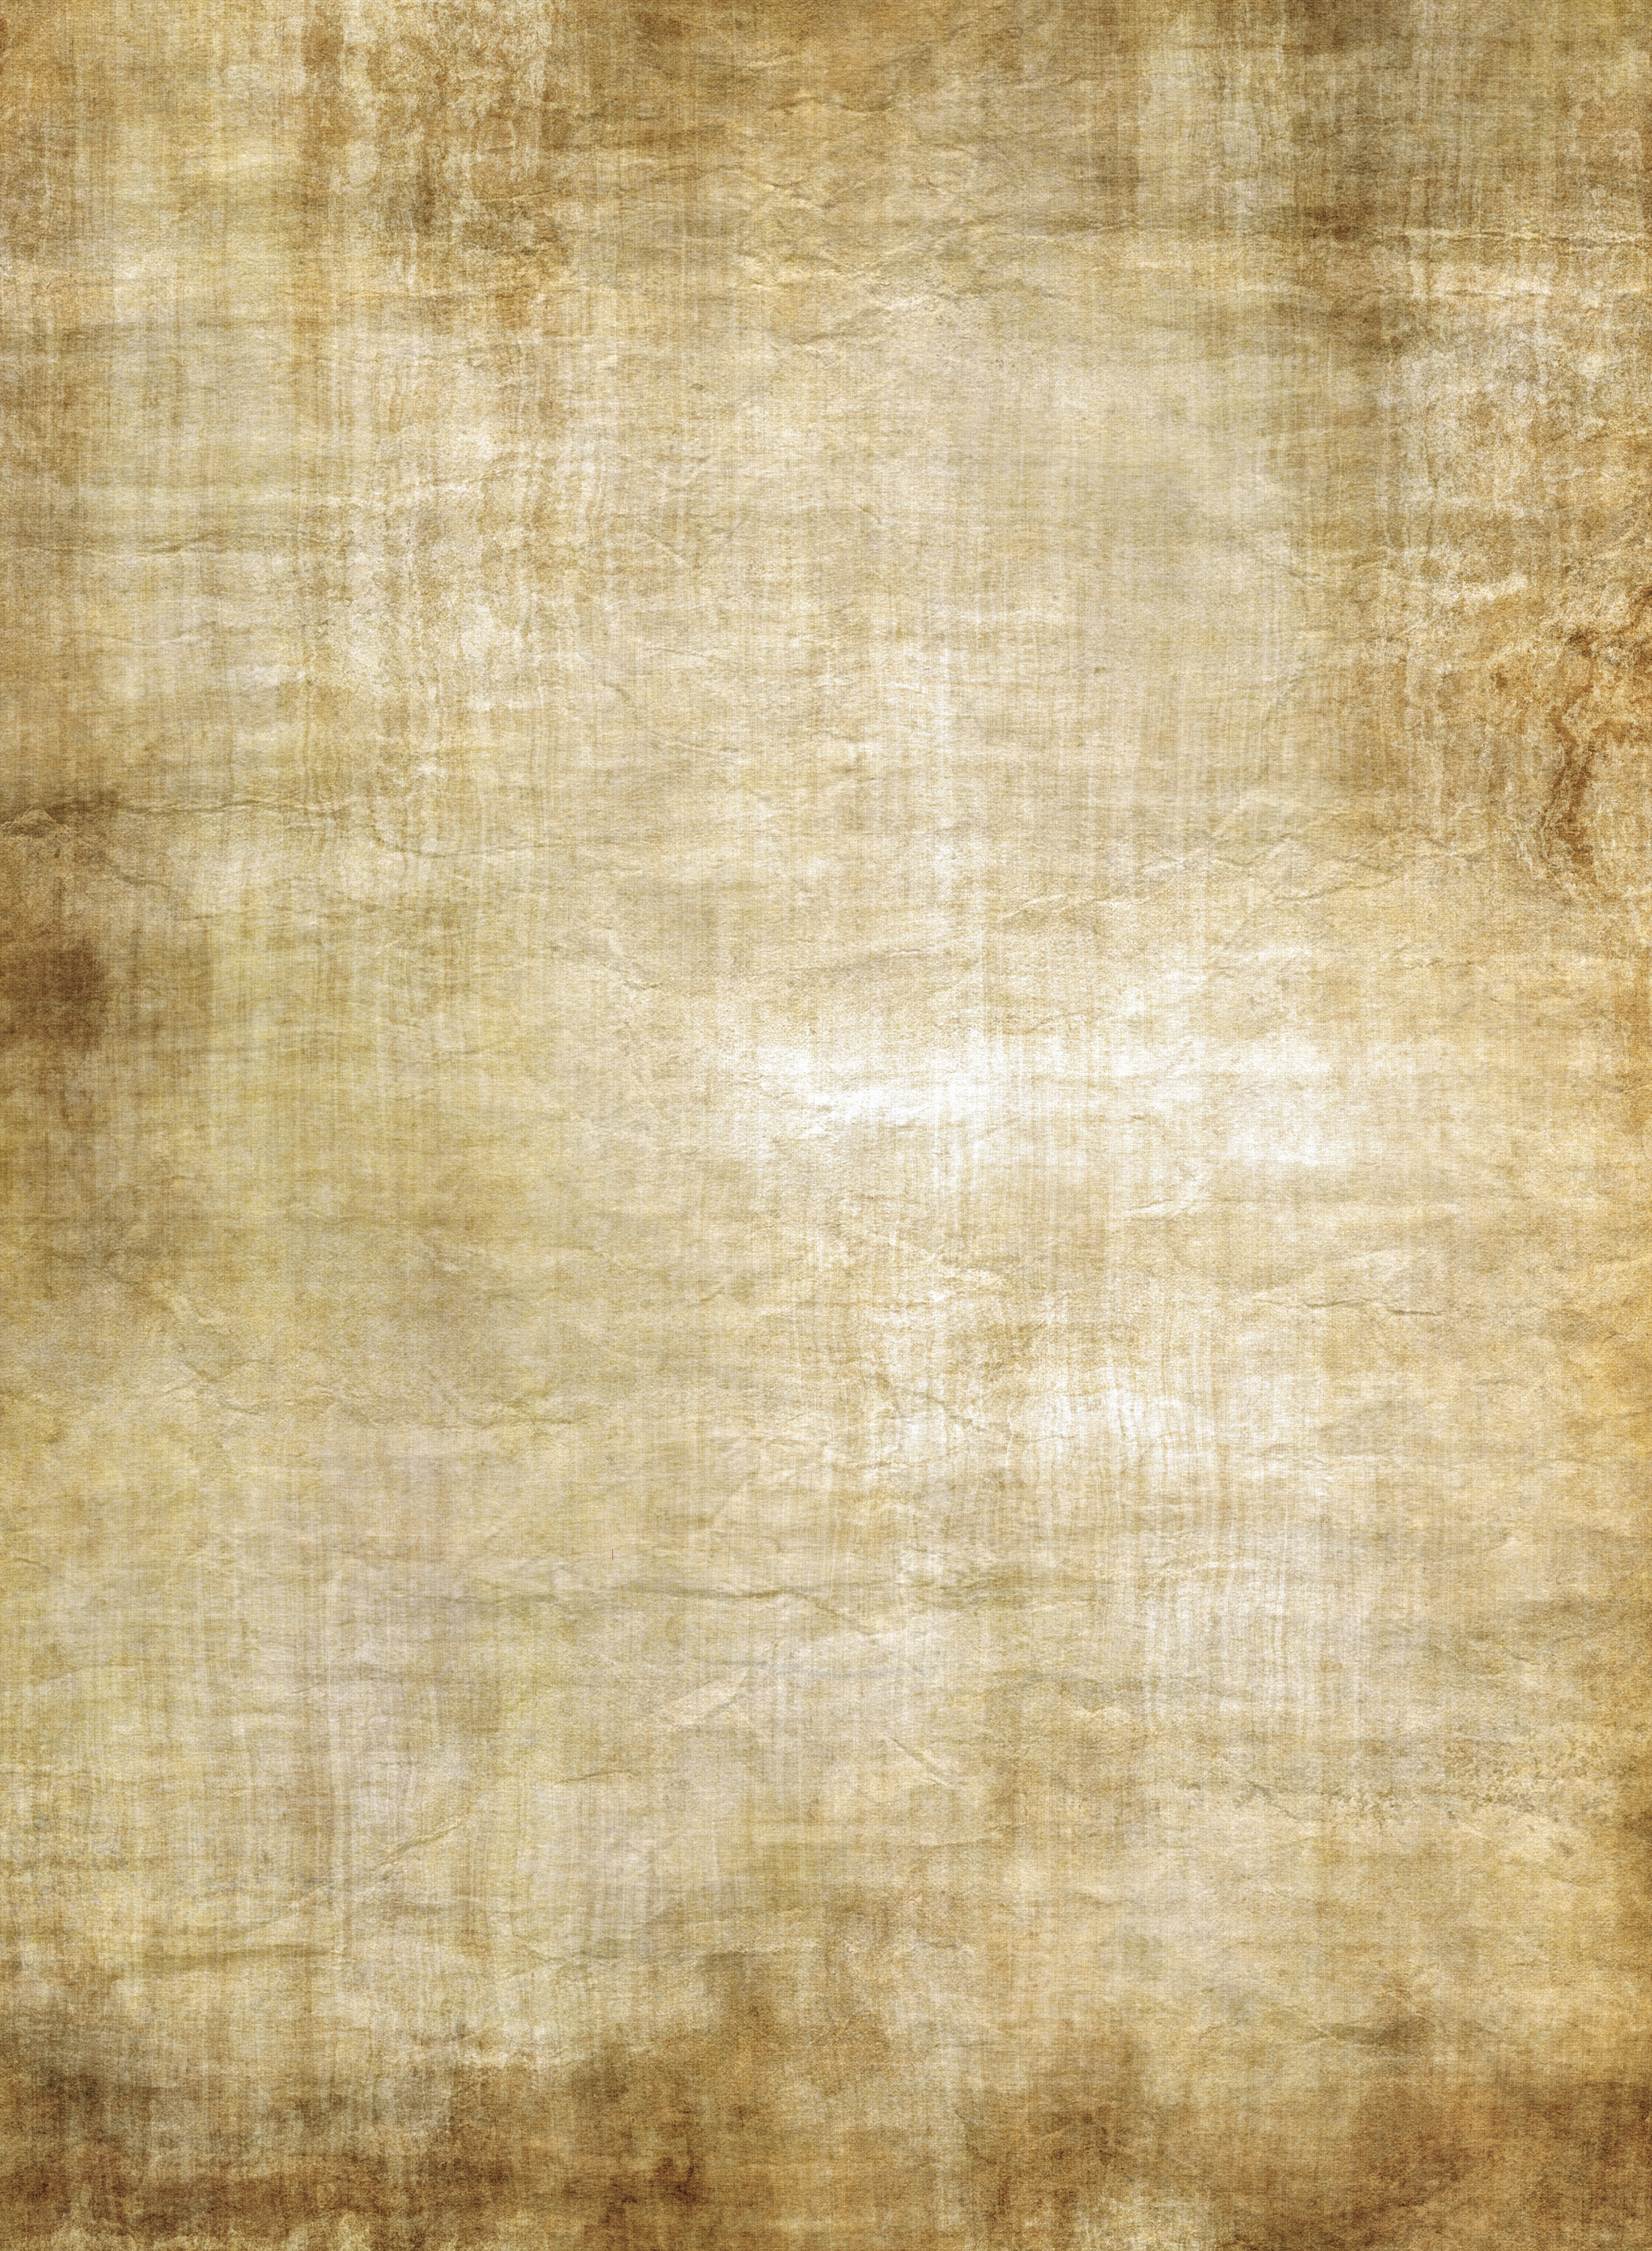 Excellent old brown paper texture background | www ...